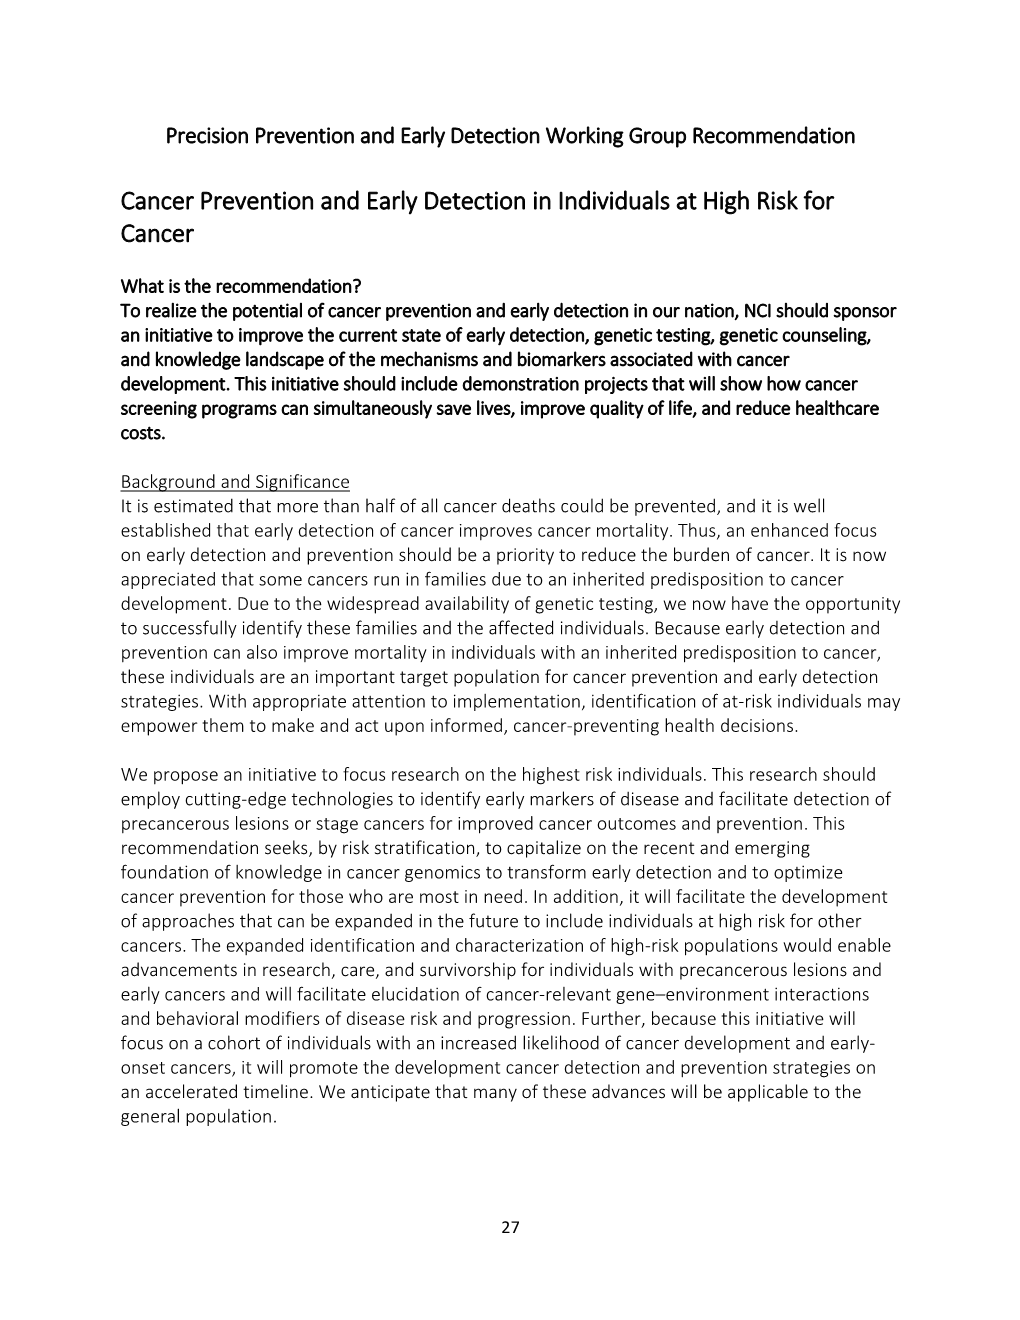 Precision Prevention and Early Detection Working Group Report